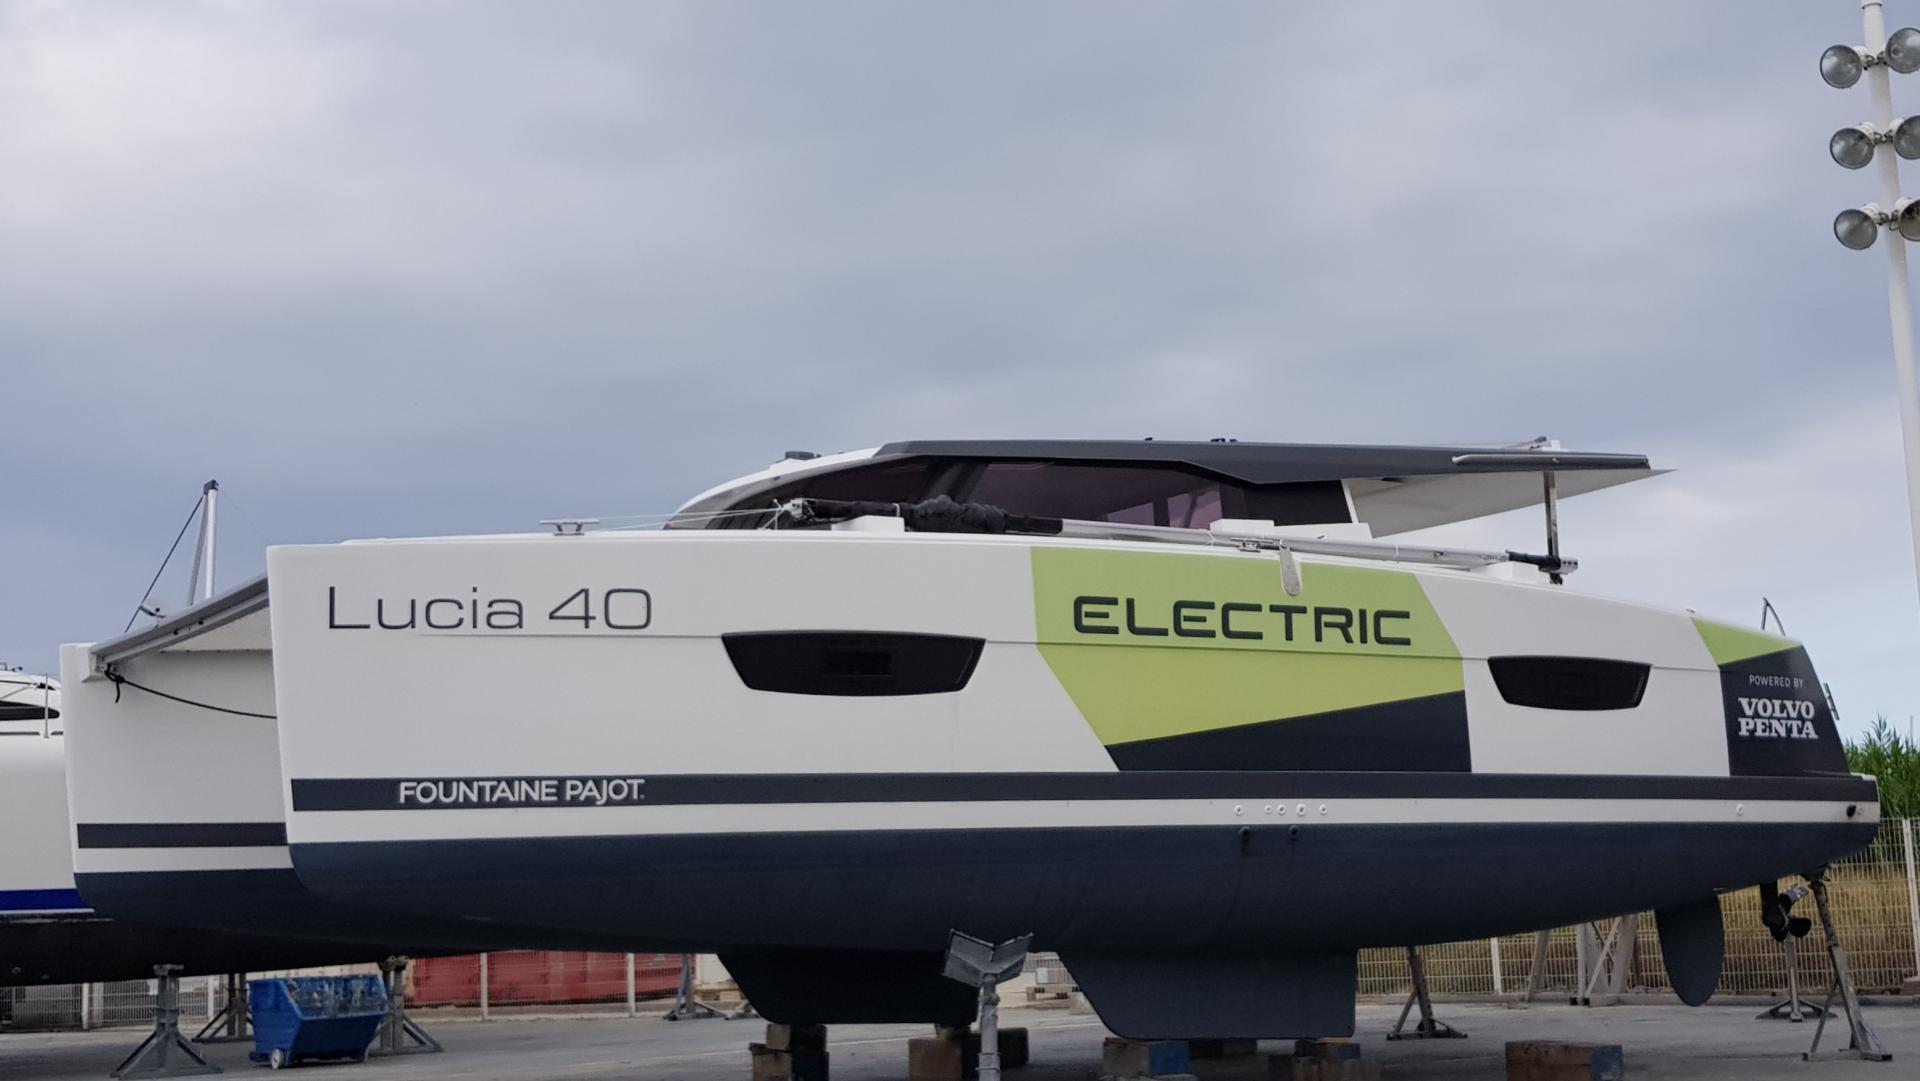 Lucia 40 electric